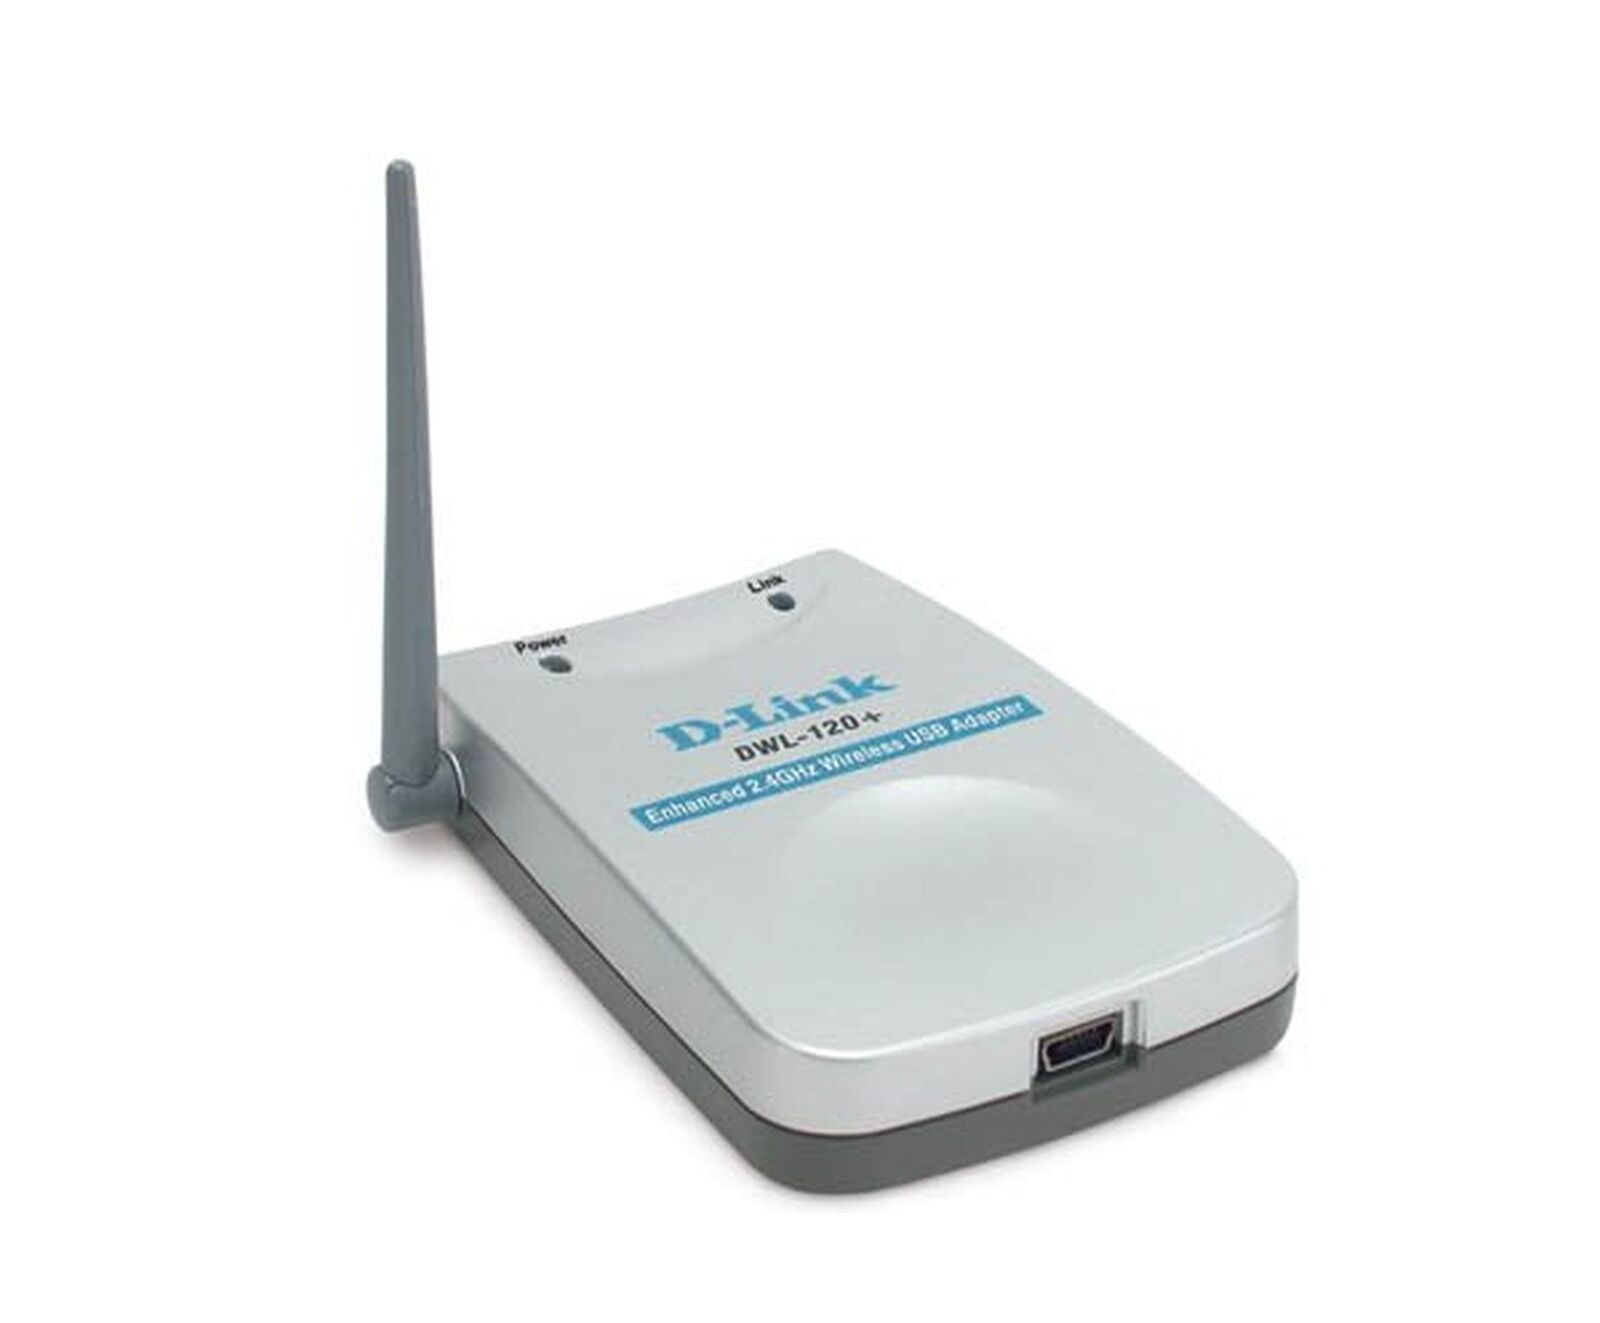 D-Link DWL-120 11 Mbps Wireless USB Network Adapter